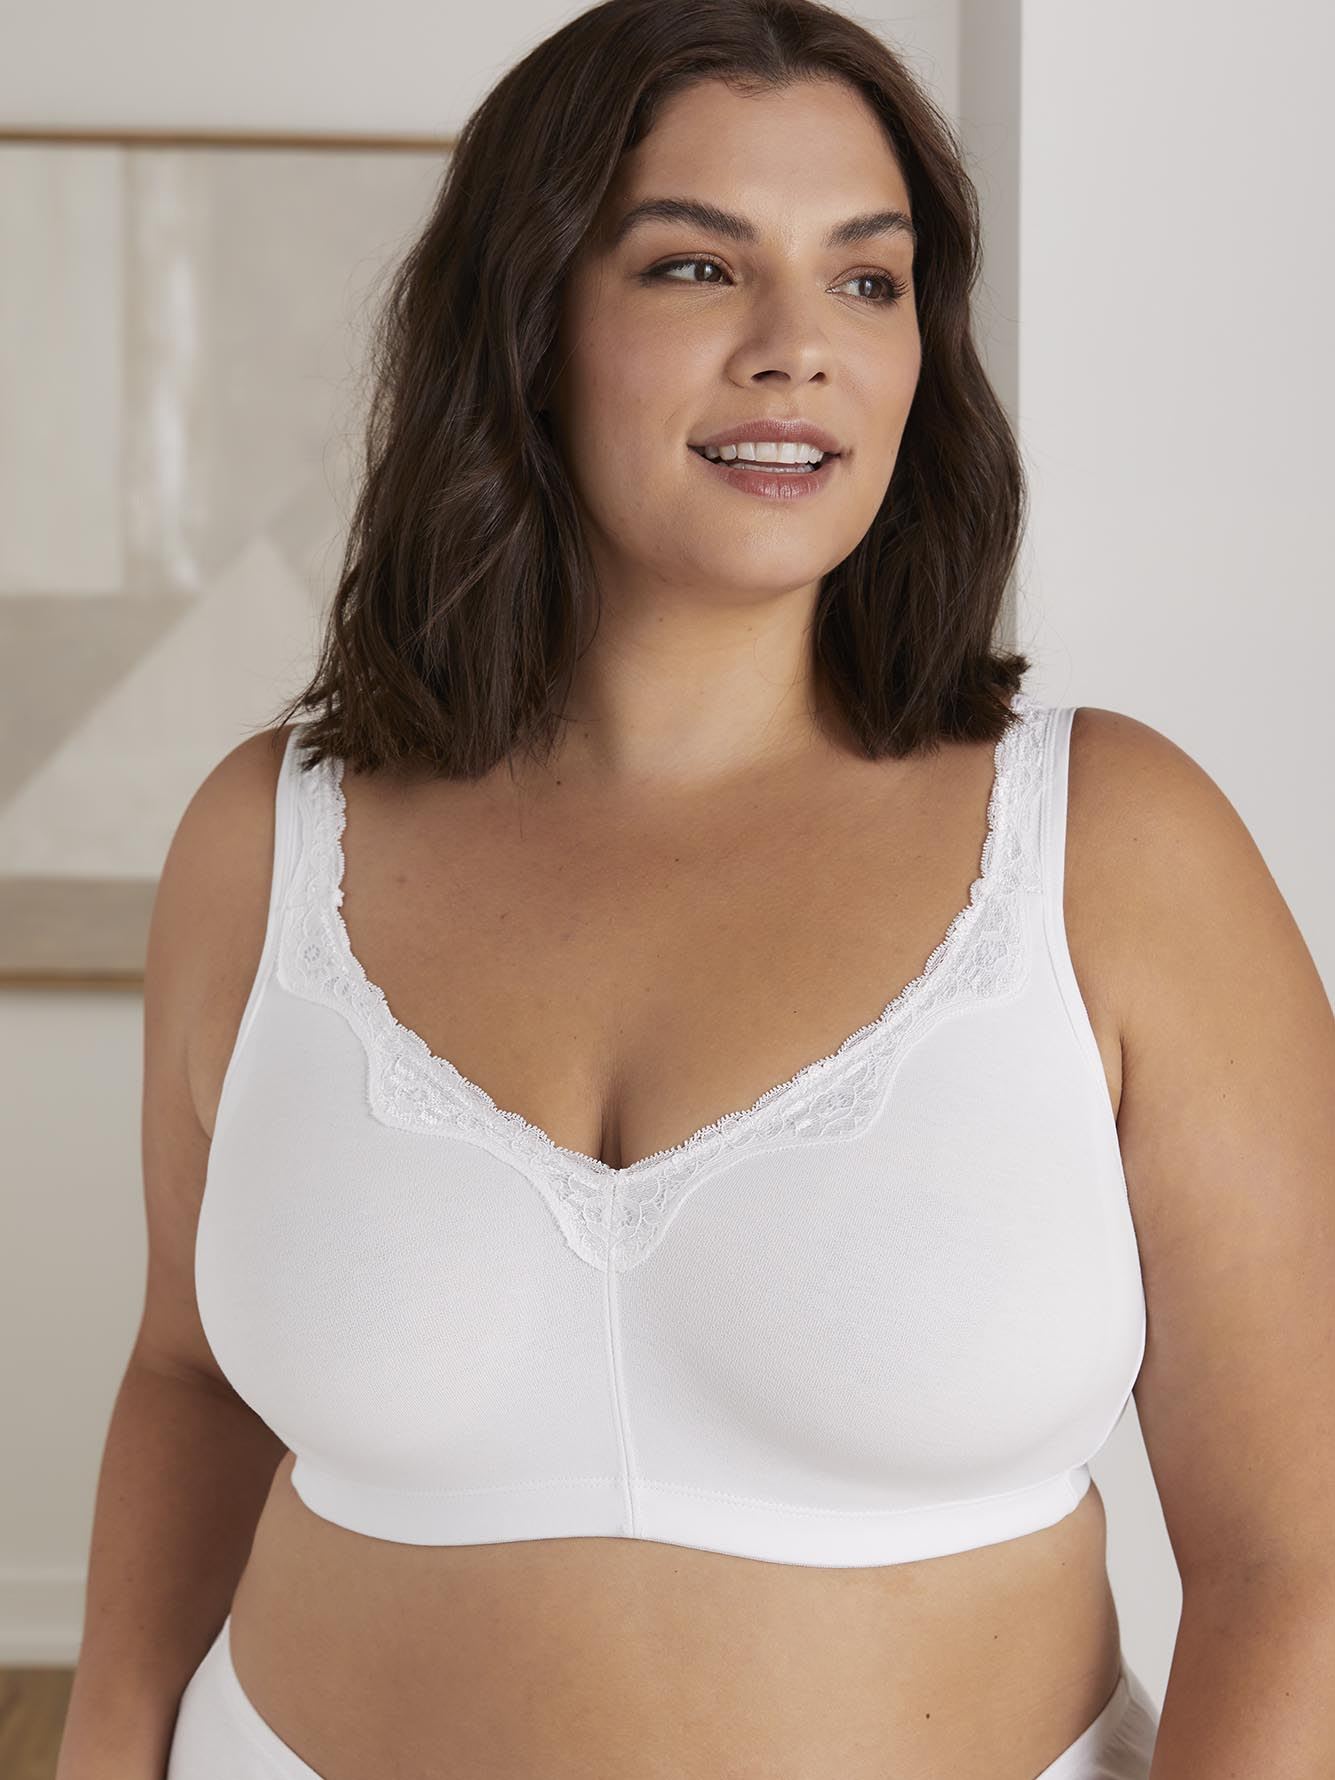 These Are The Best Wireless Bras That Are SO Soft And Make Your